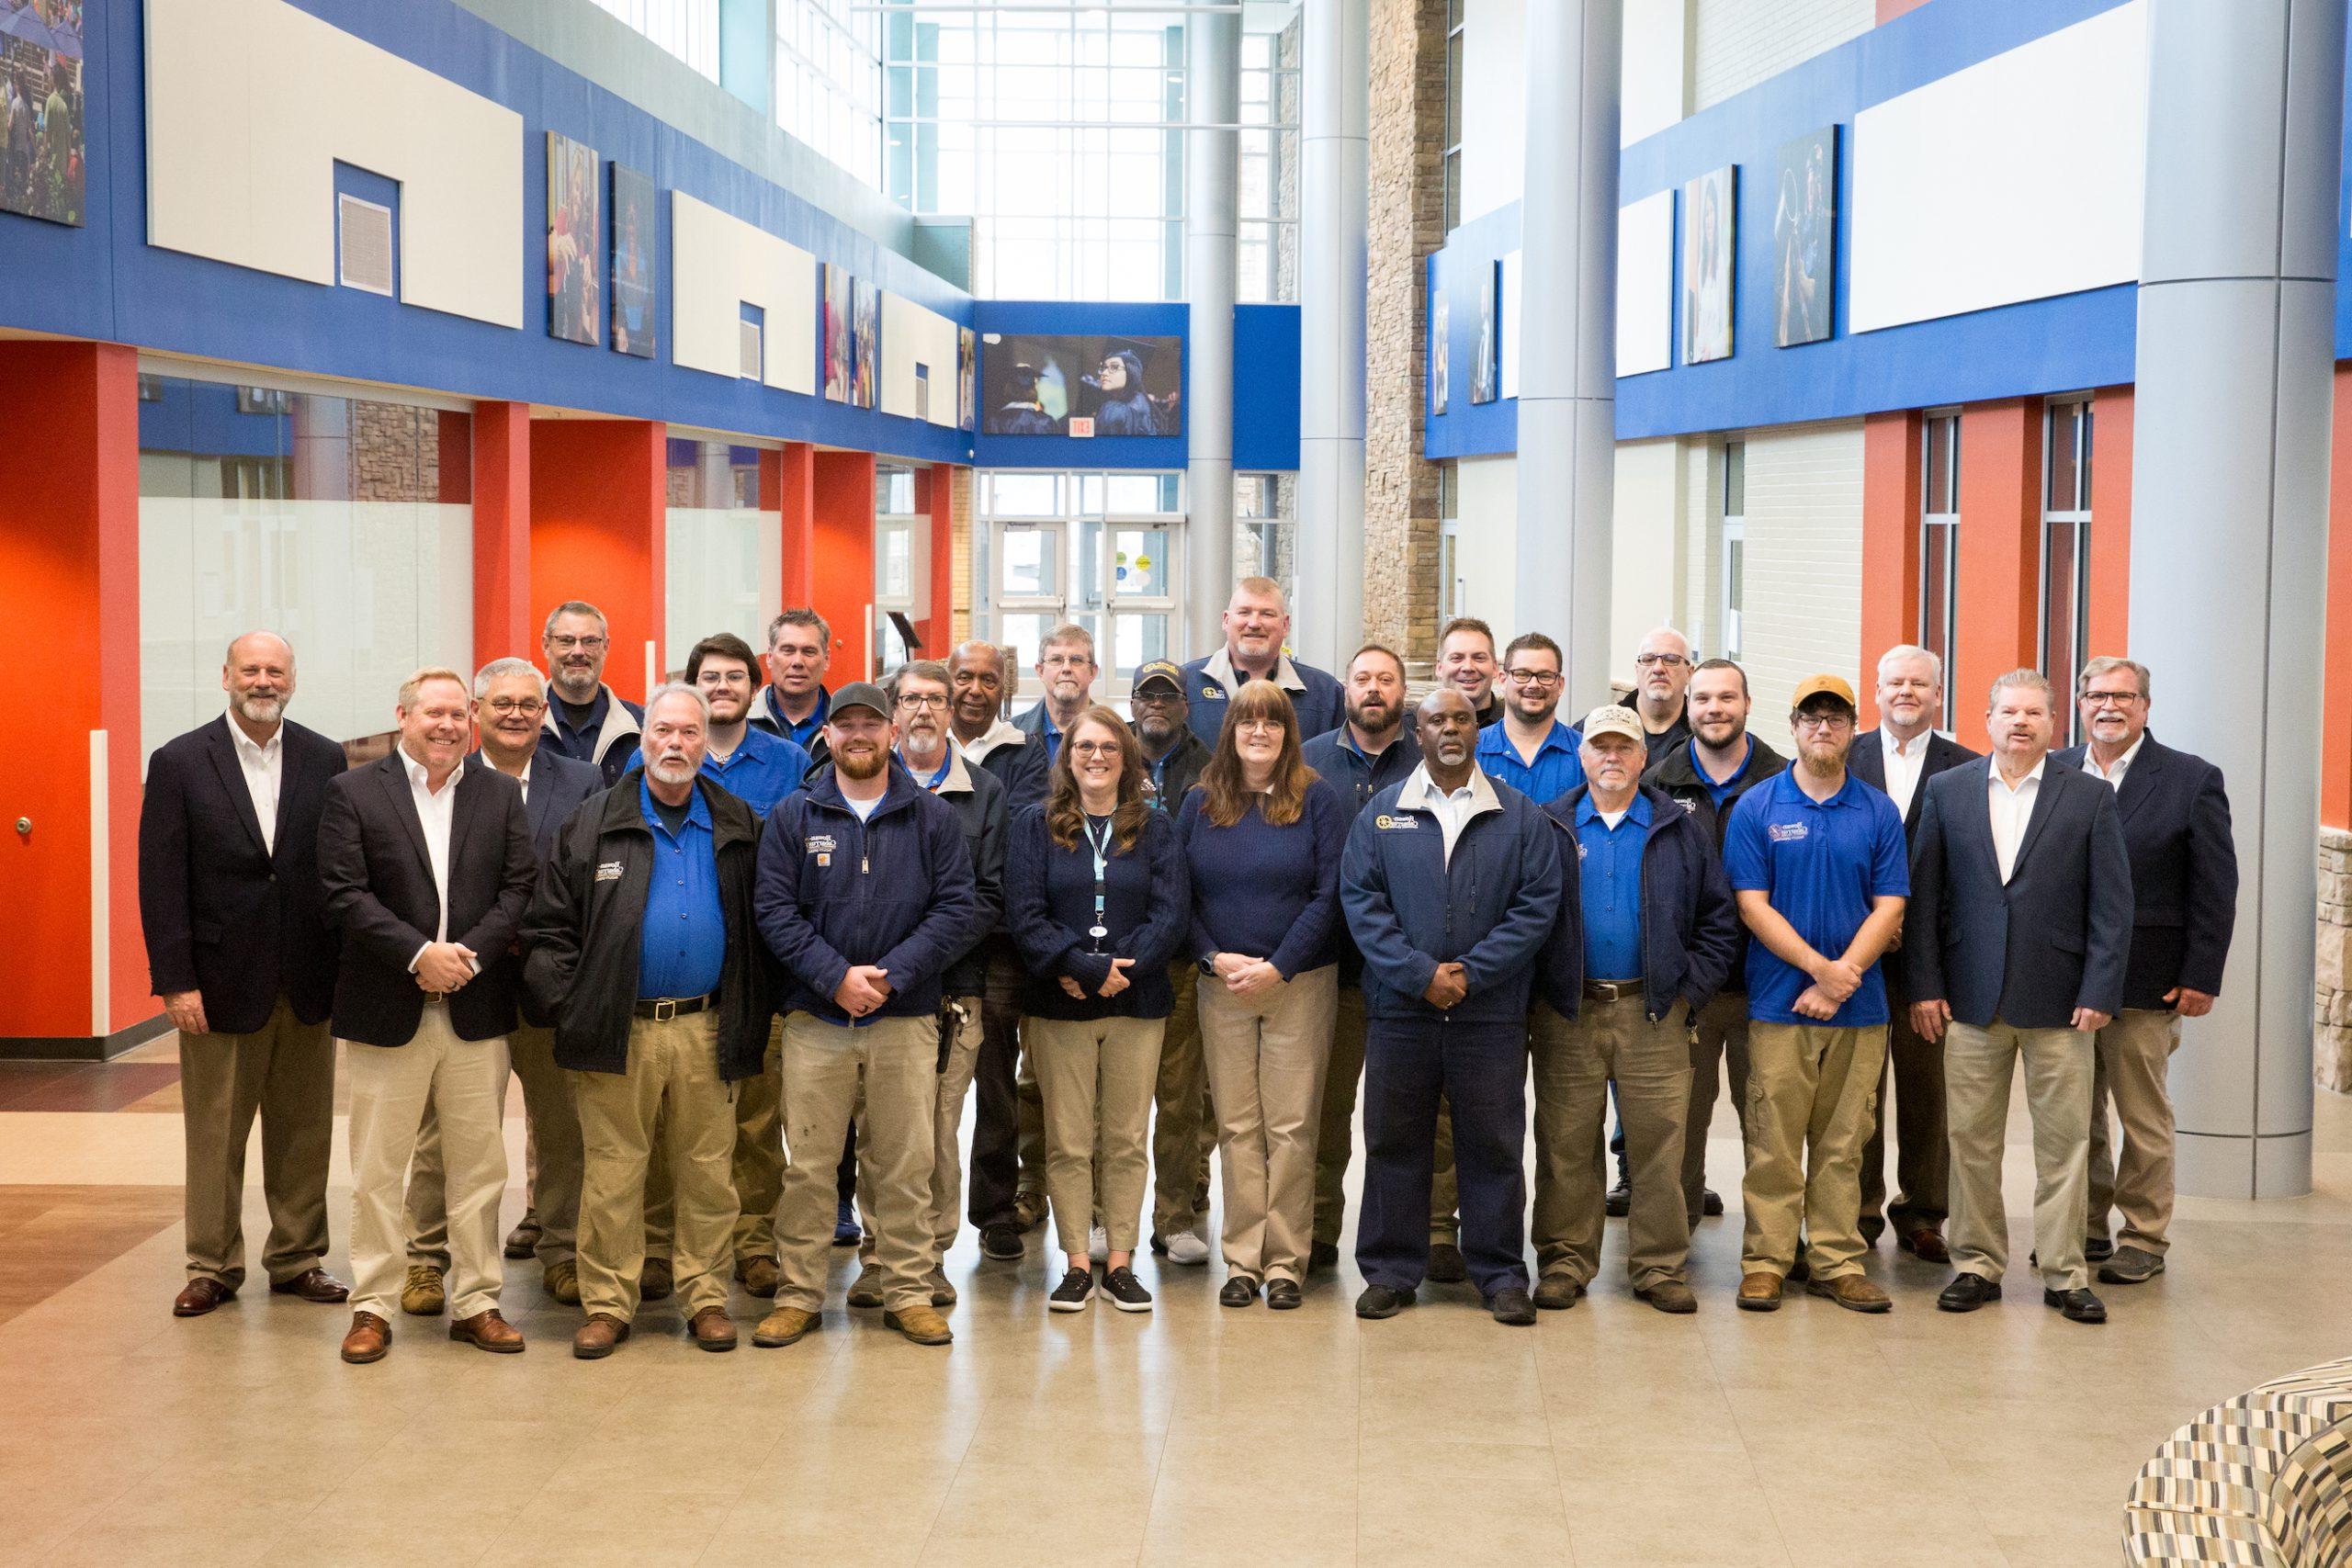 College Environment staff pose for group photo in Atrium on North Campus